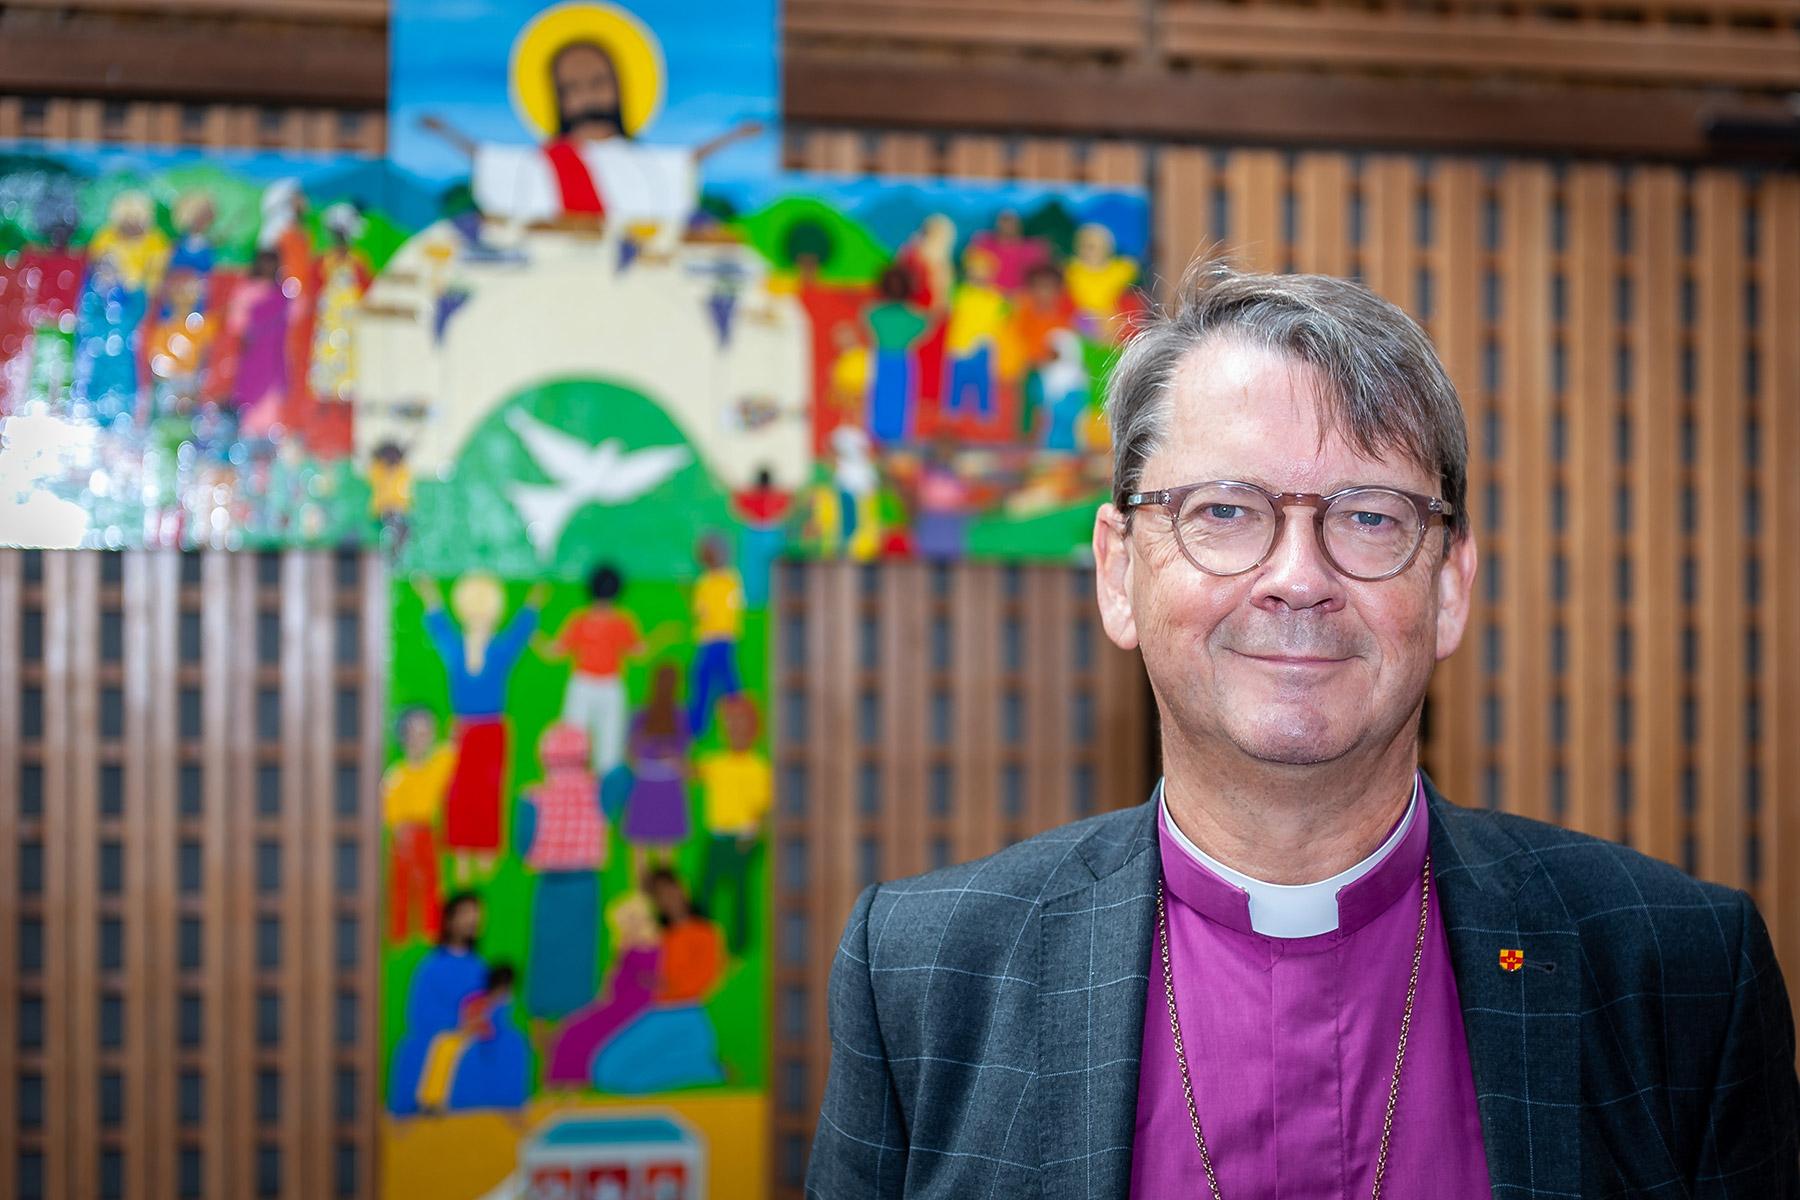 Bishop Johan Tyrberg, Diocese of Lund, Sweden, during a visit to the LWF Communion Office in Geneva, Switzerland, September 2021. Photo: LWF/S. Gallay